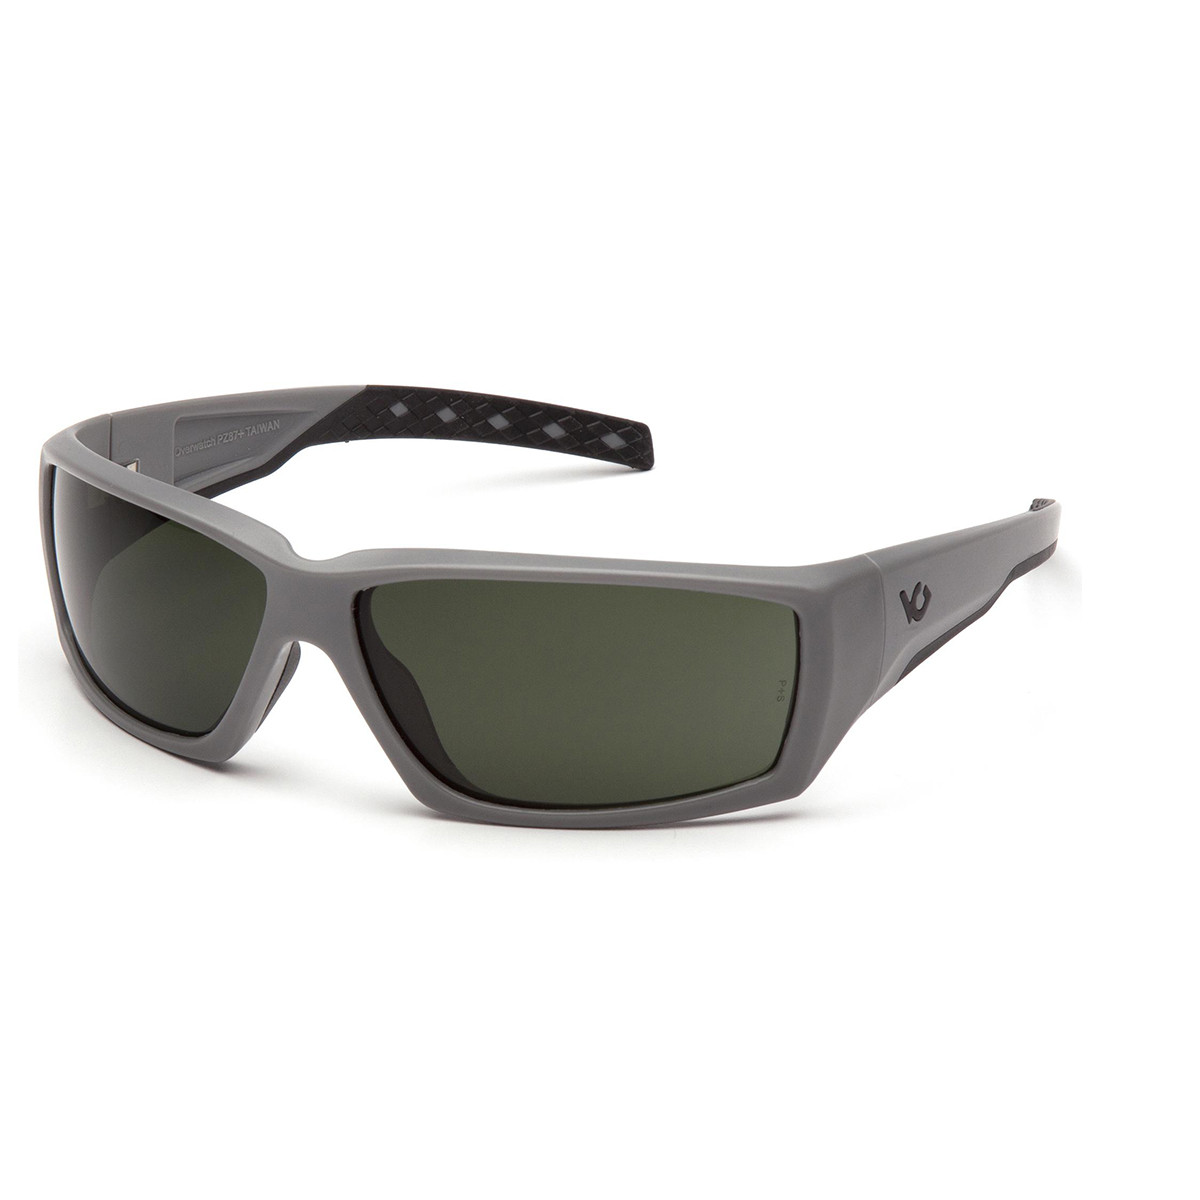 Venture Gear Overwatch Tactical Sunglasses - Tactical Asia - Philippines